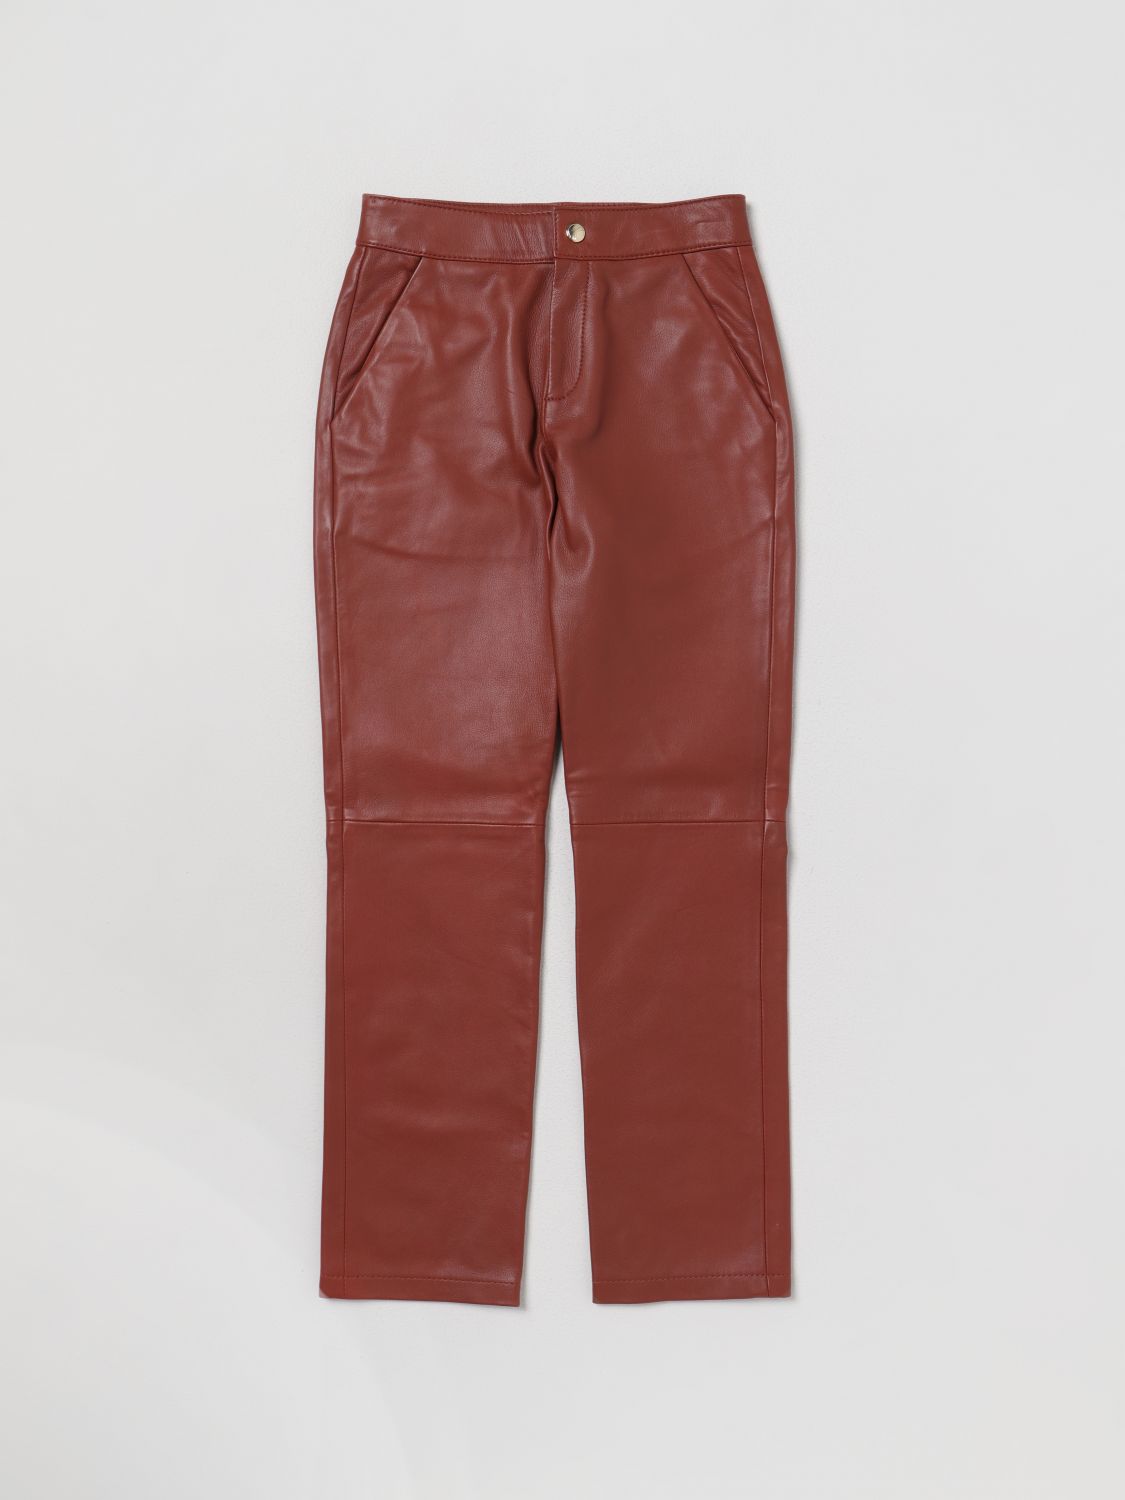 Chloé Kids' Leather Trousers With Pockets In Burgundy